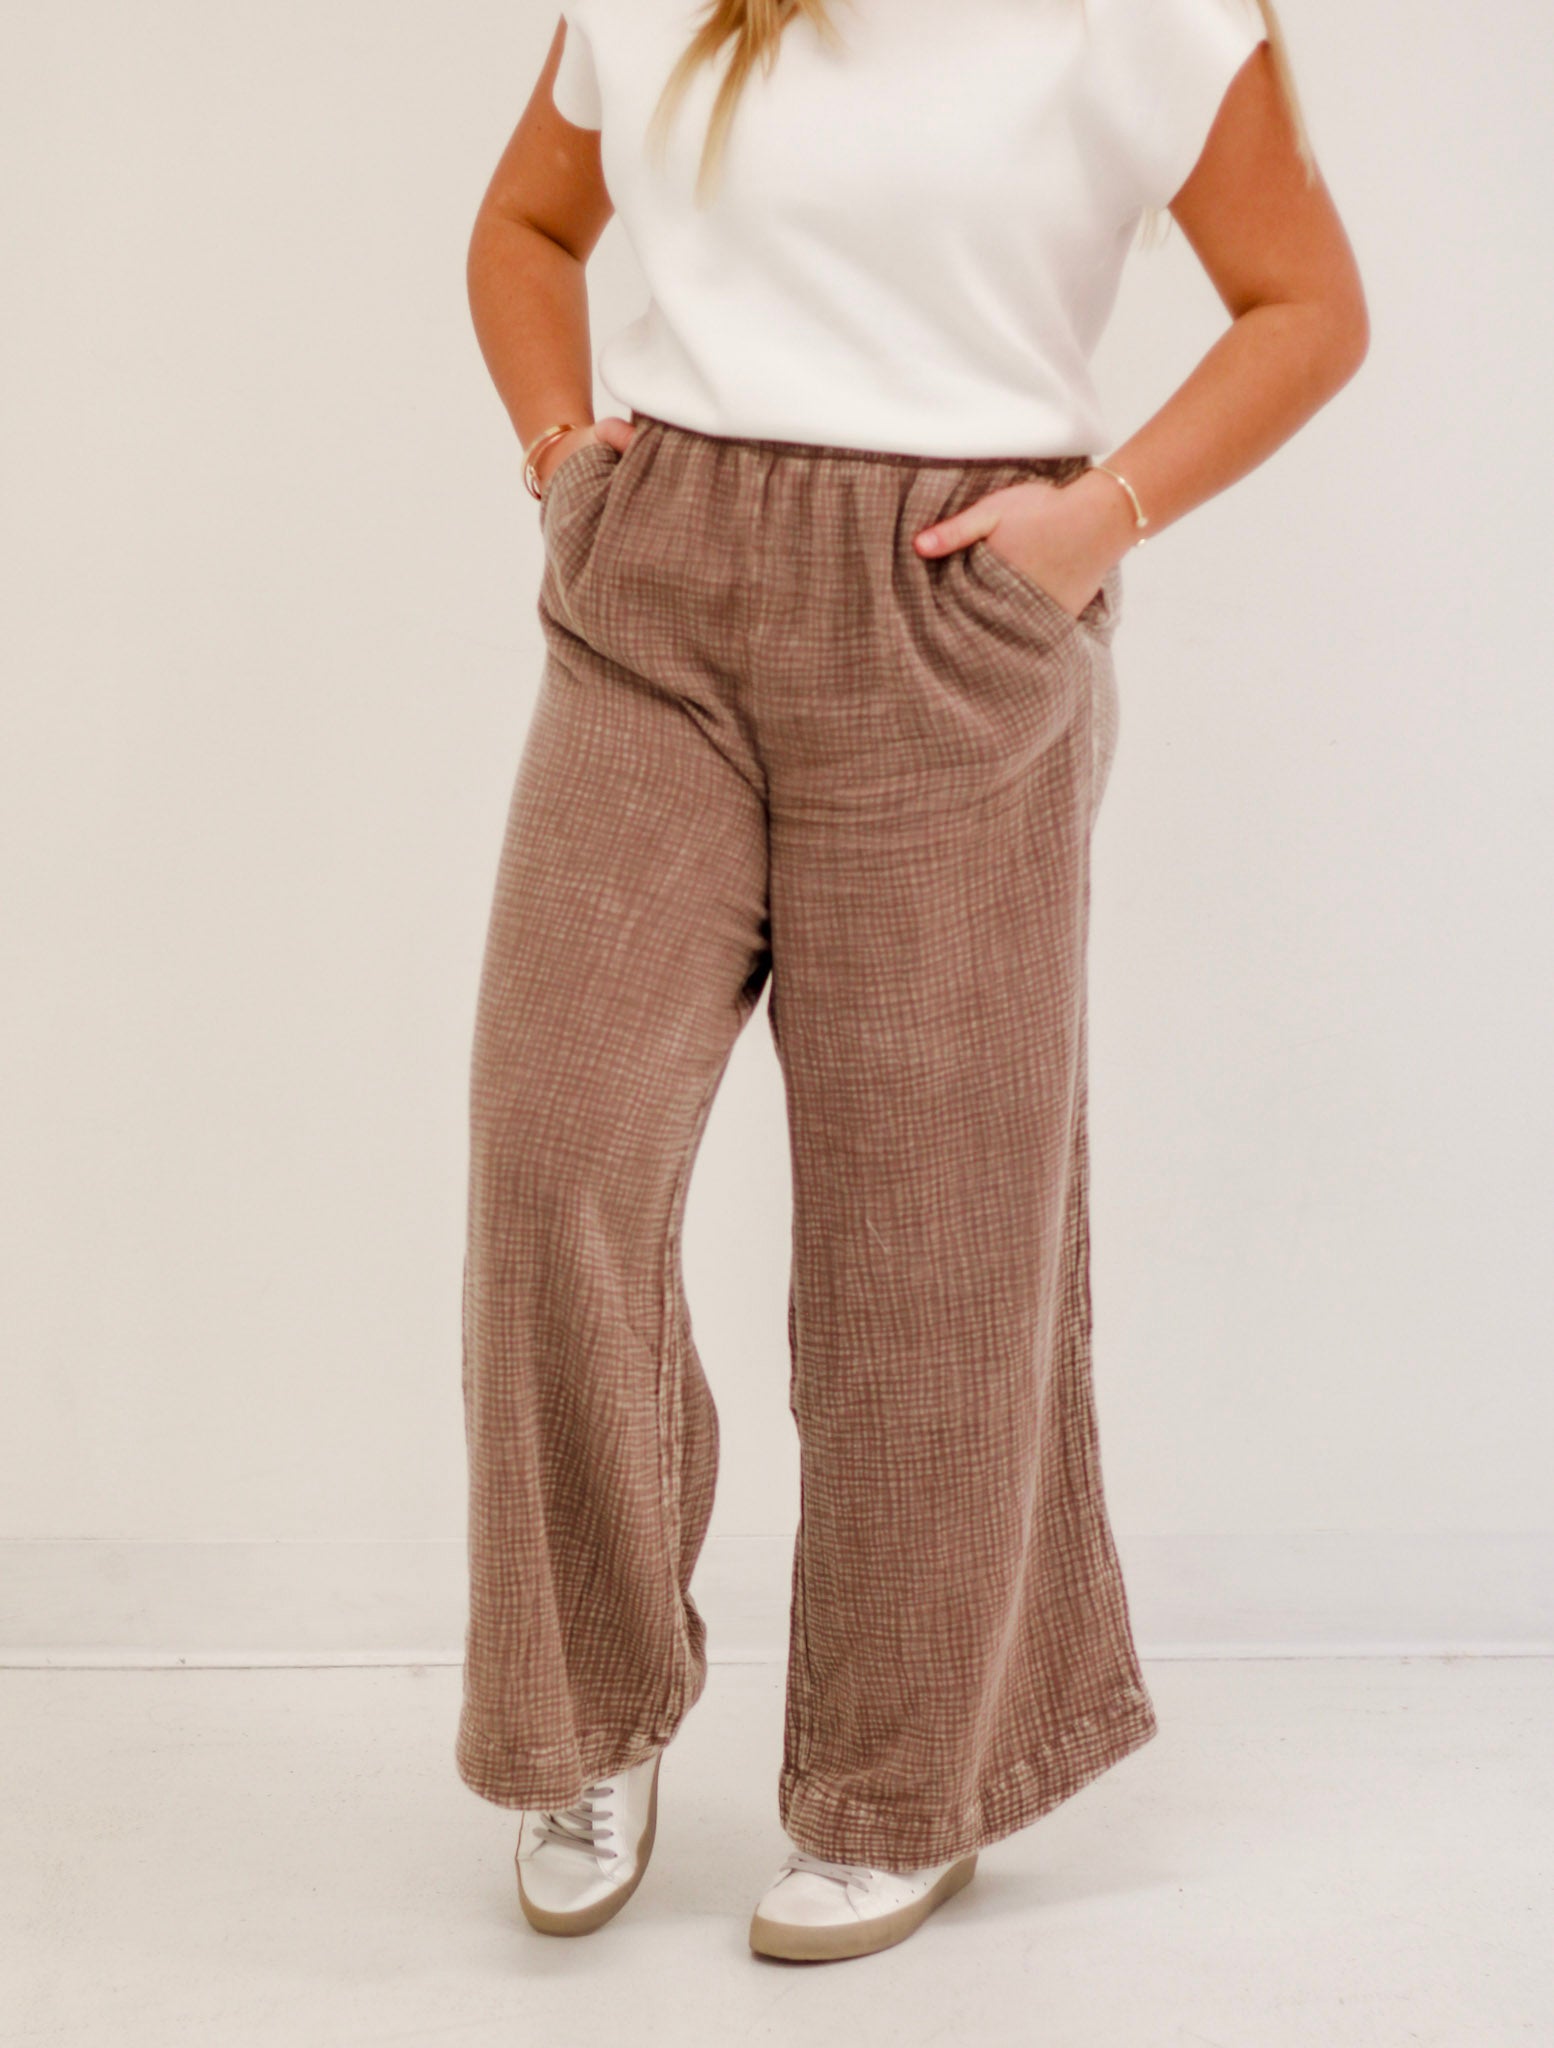 I'll Have These Mineral Wash Pants